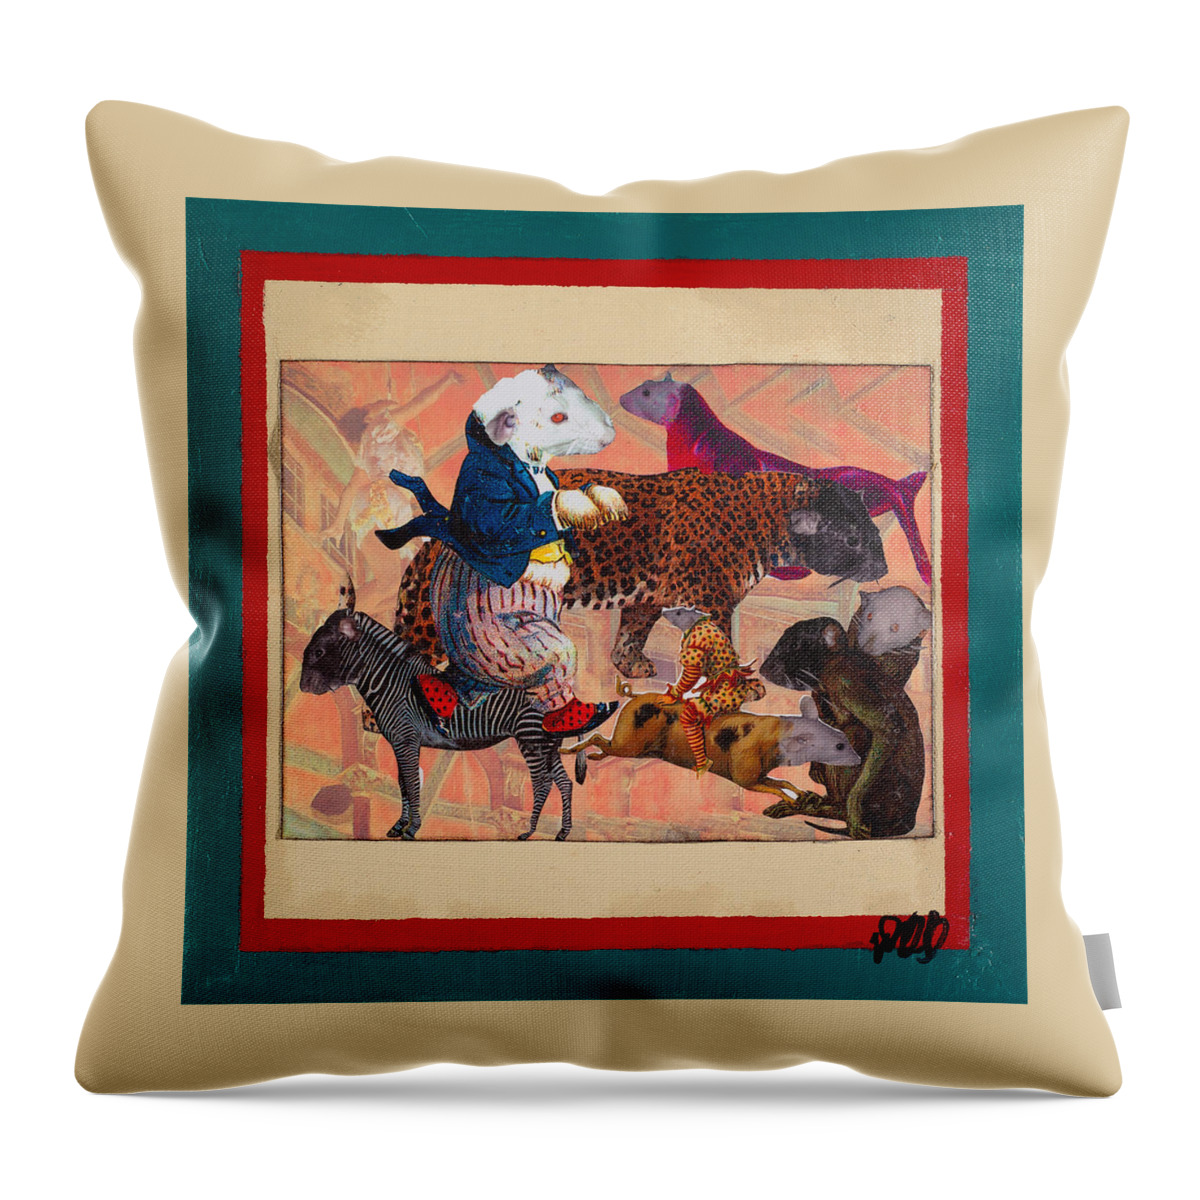 Circus Throw Pillow featuring the mixed media A Strange and Wonderful People by Dawn Boswell Burke